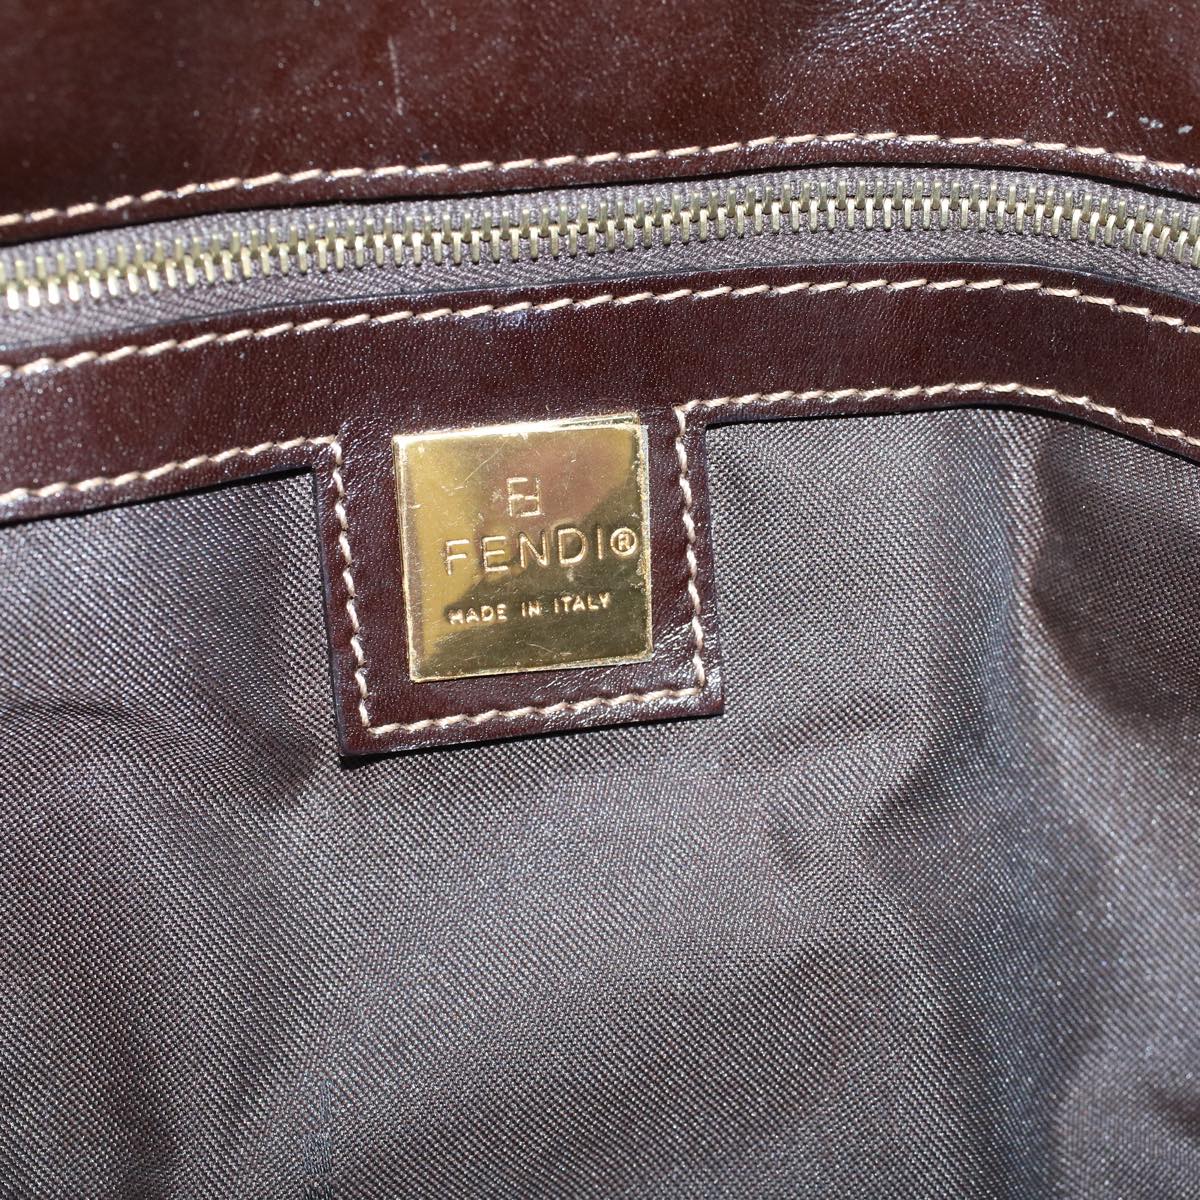 FENDI Zucchino Canvas Shoulder Bag Coated Canvas Brown Auth 60109